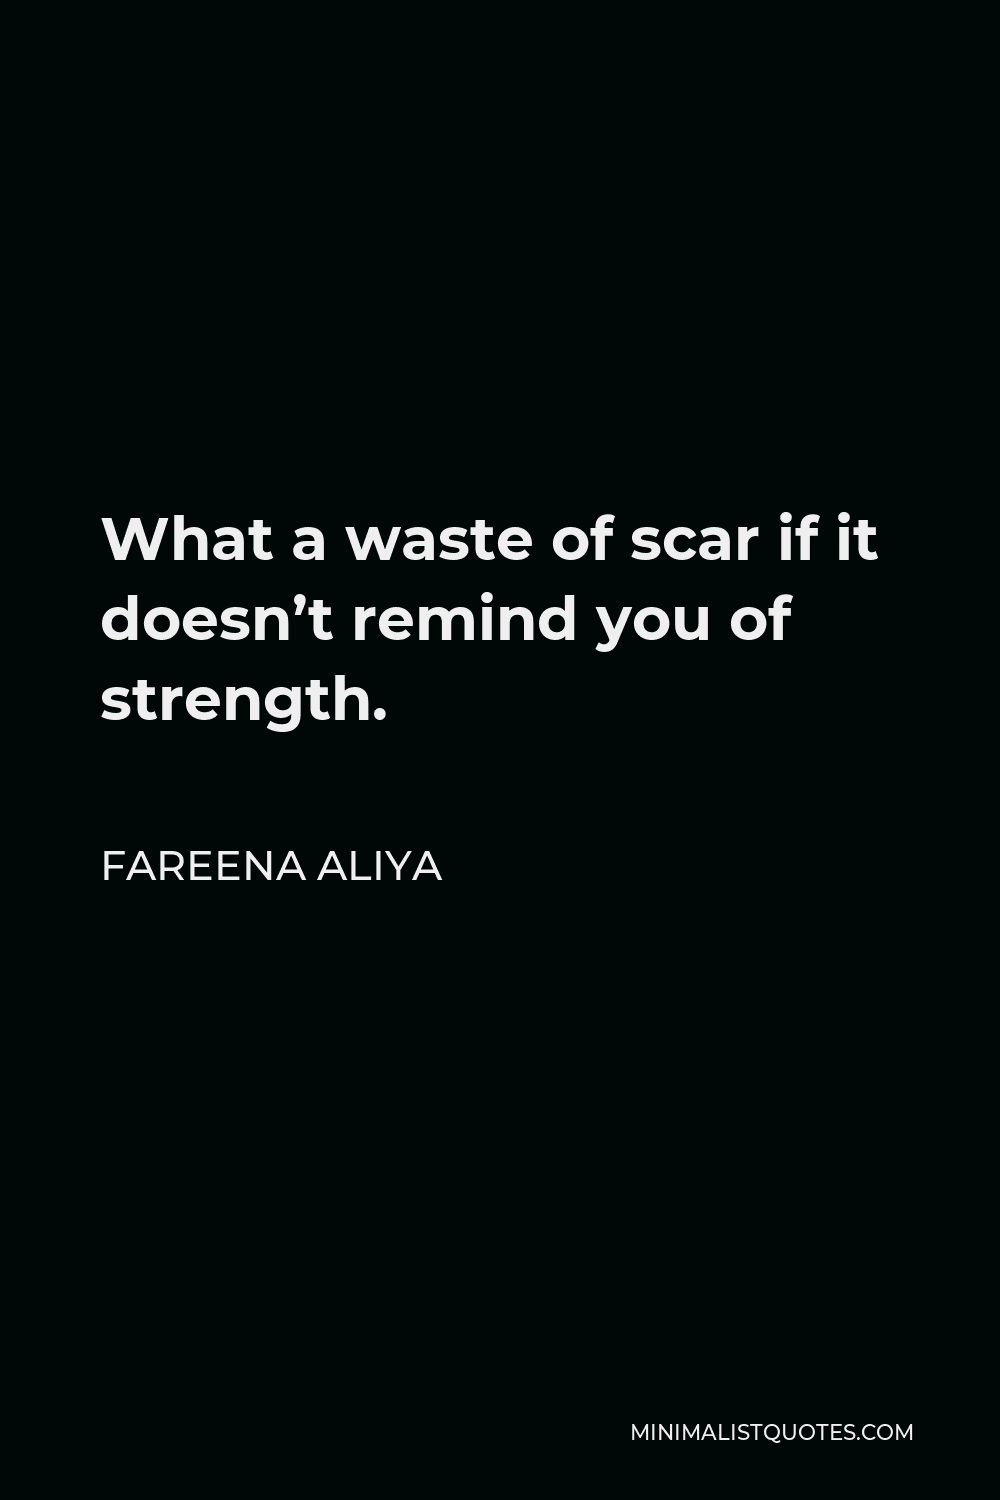 Fareena Aliya Quote - What a waste of scar if it doesn’t remind you of strength.